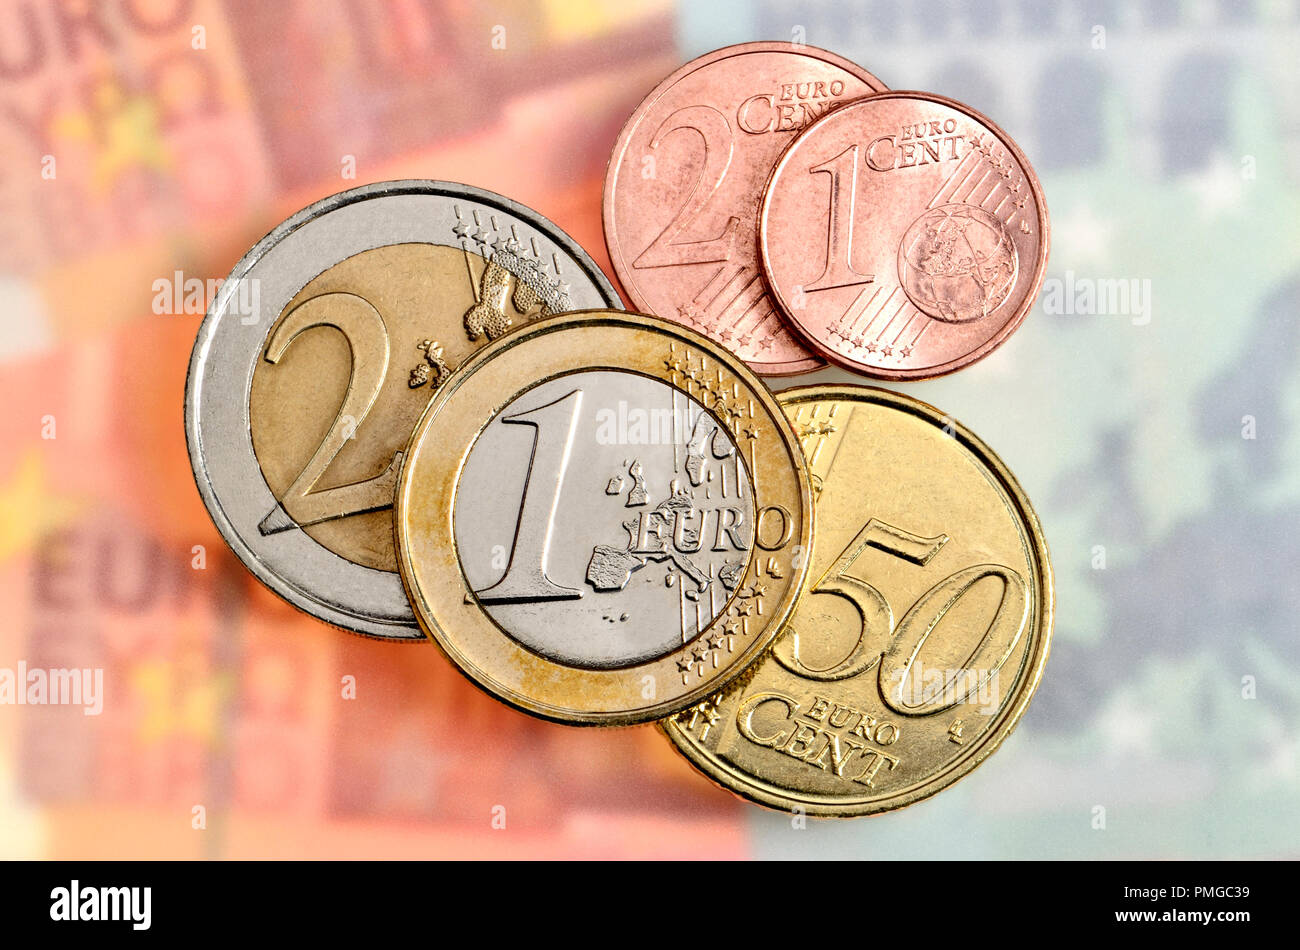 Euro coins and notes Stock Photo